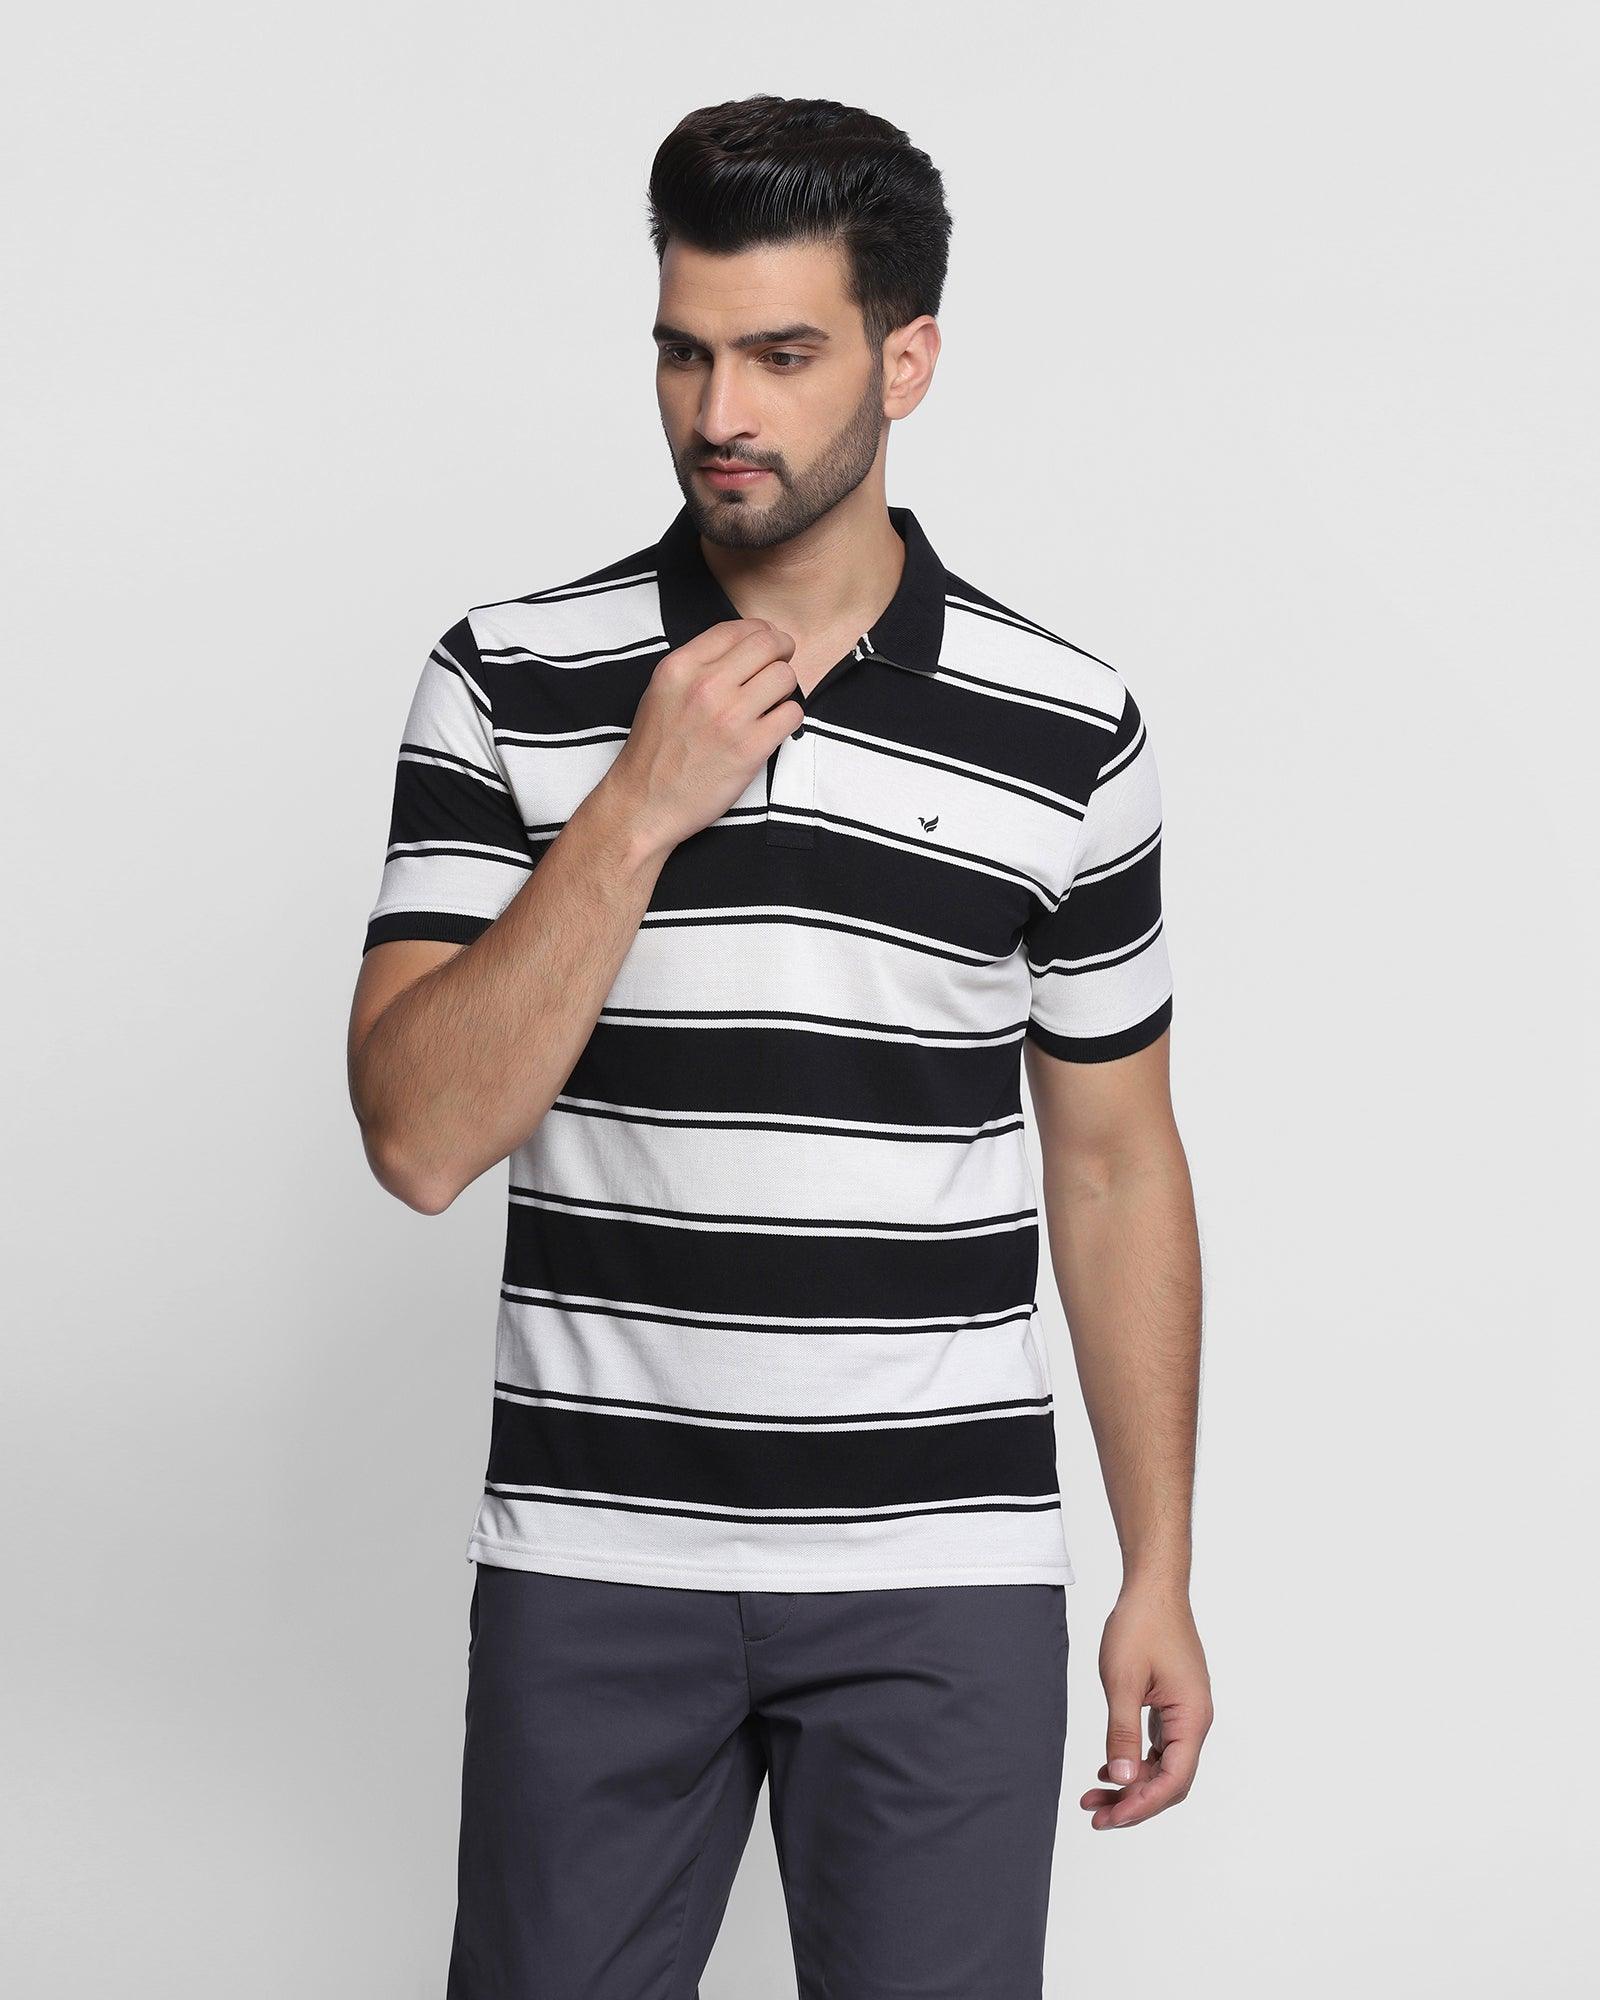 Polo Jet Black Striped T Shirt - Rugby